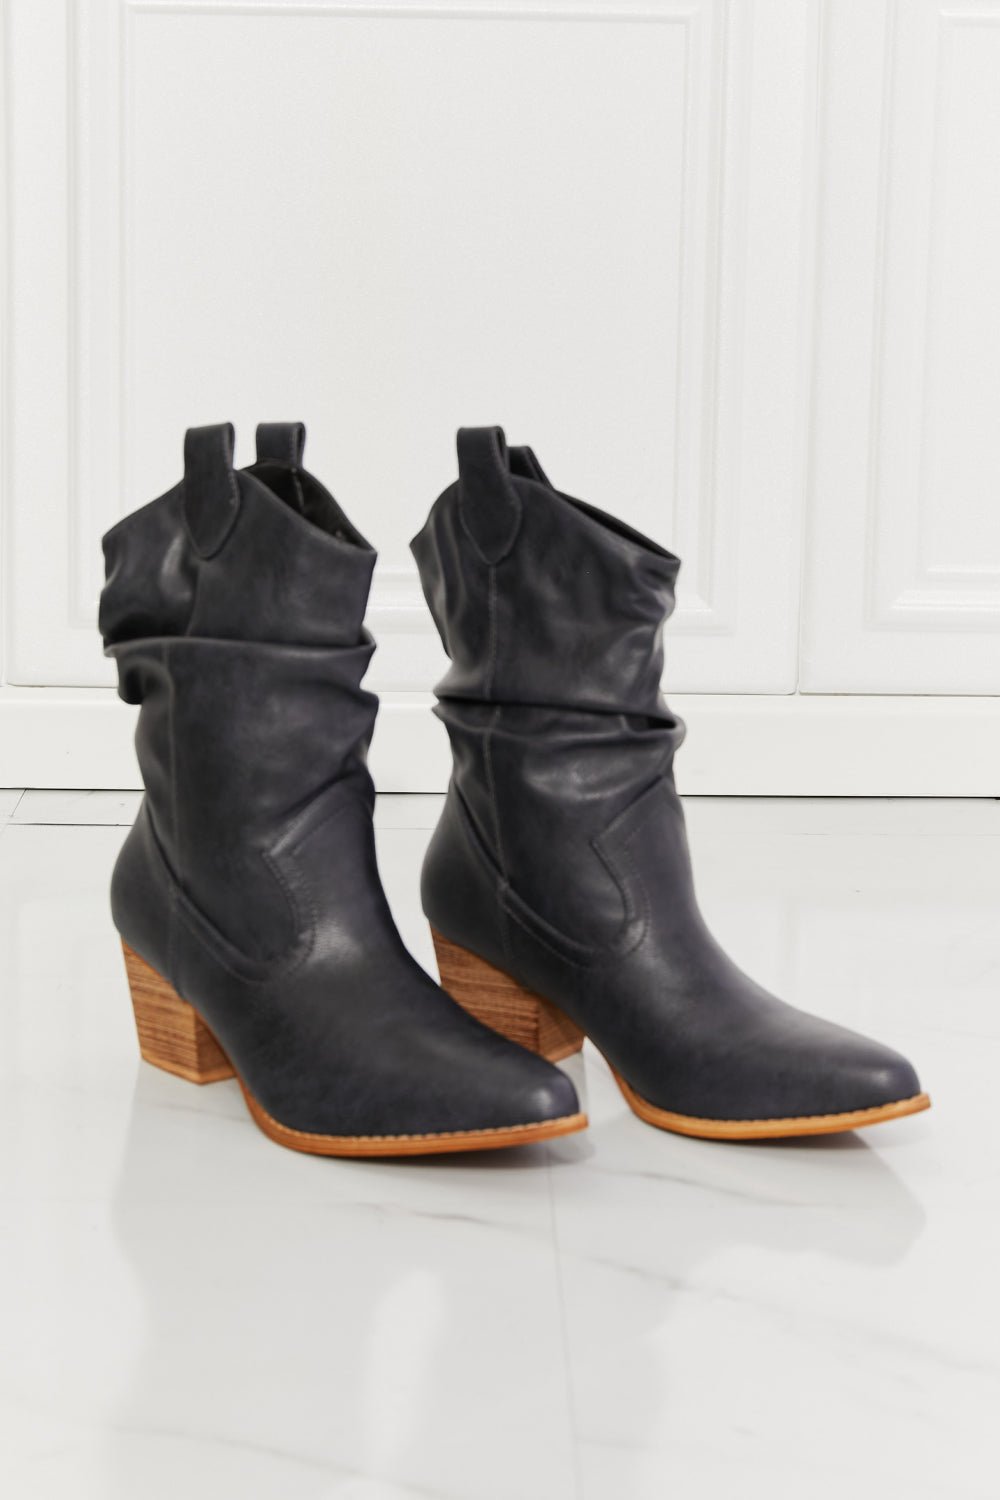 Vegan Leather Scrunch Cowgirl Boots in NavyCowboy BootsMelody